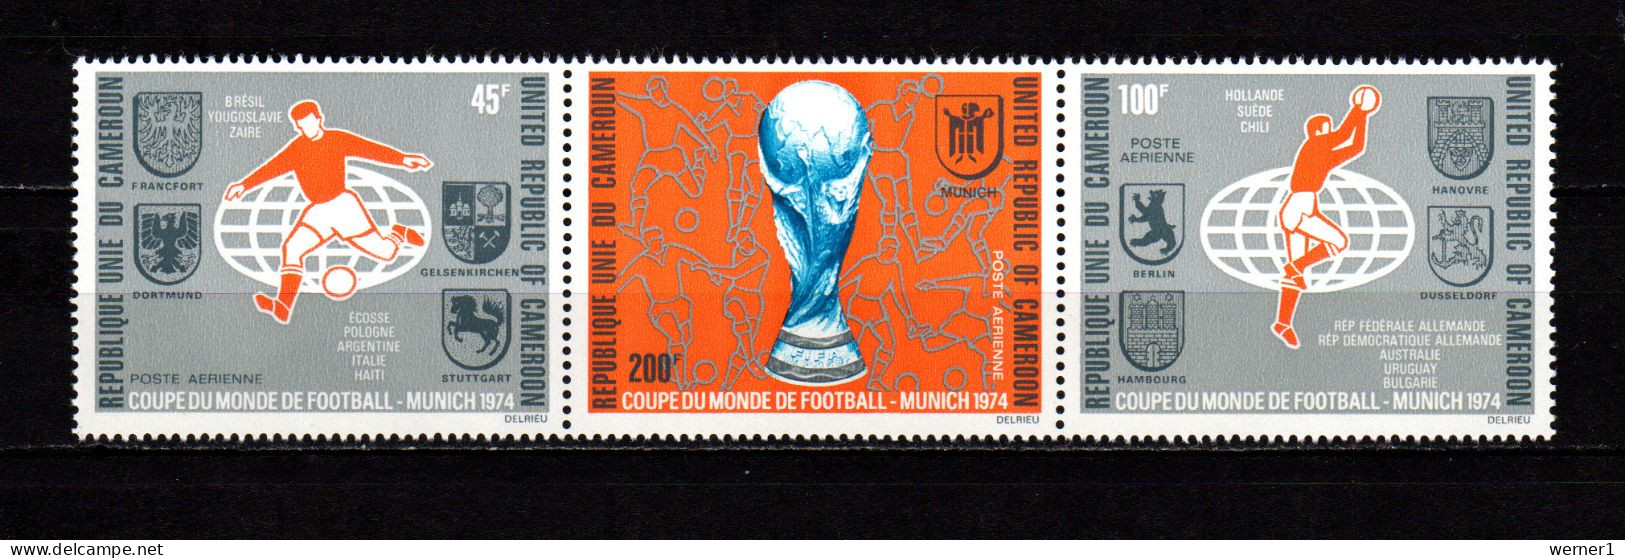 Cameroon - Cameroun 1974 Football Soccer World Cup Strip Of 3 MNH - 1974 – Allemagne Fédérale